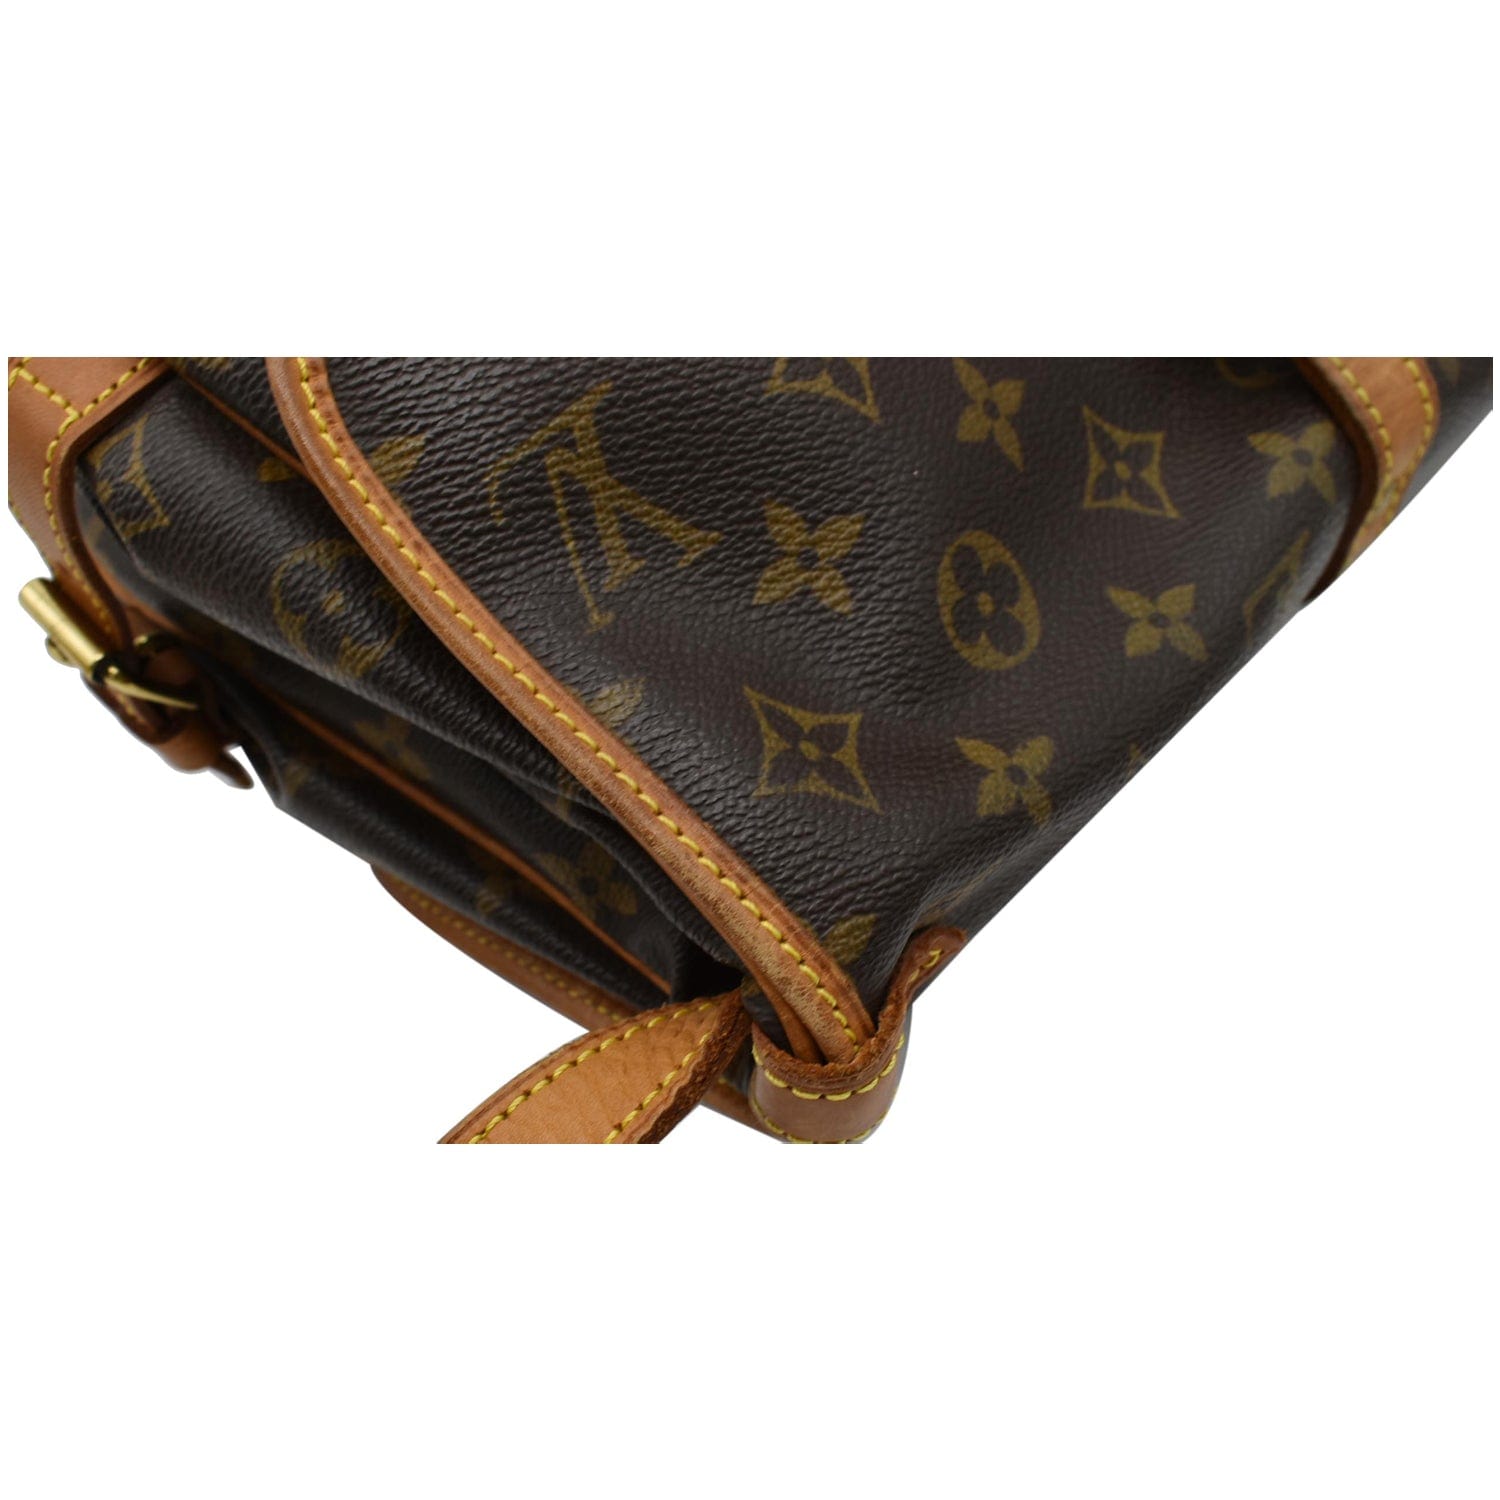 Saumur leather crossbody bag Louis Vuitton Brown in Leather - 35190011